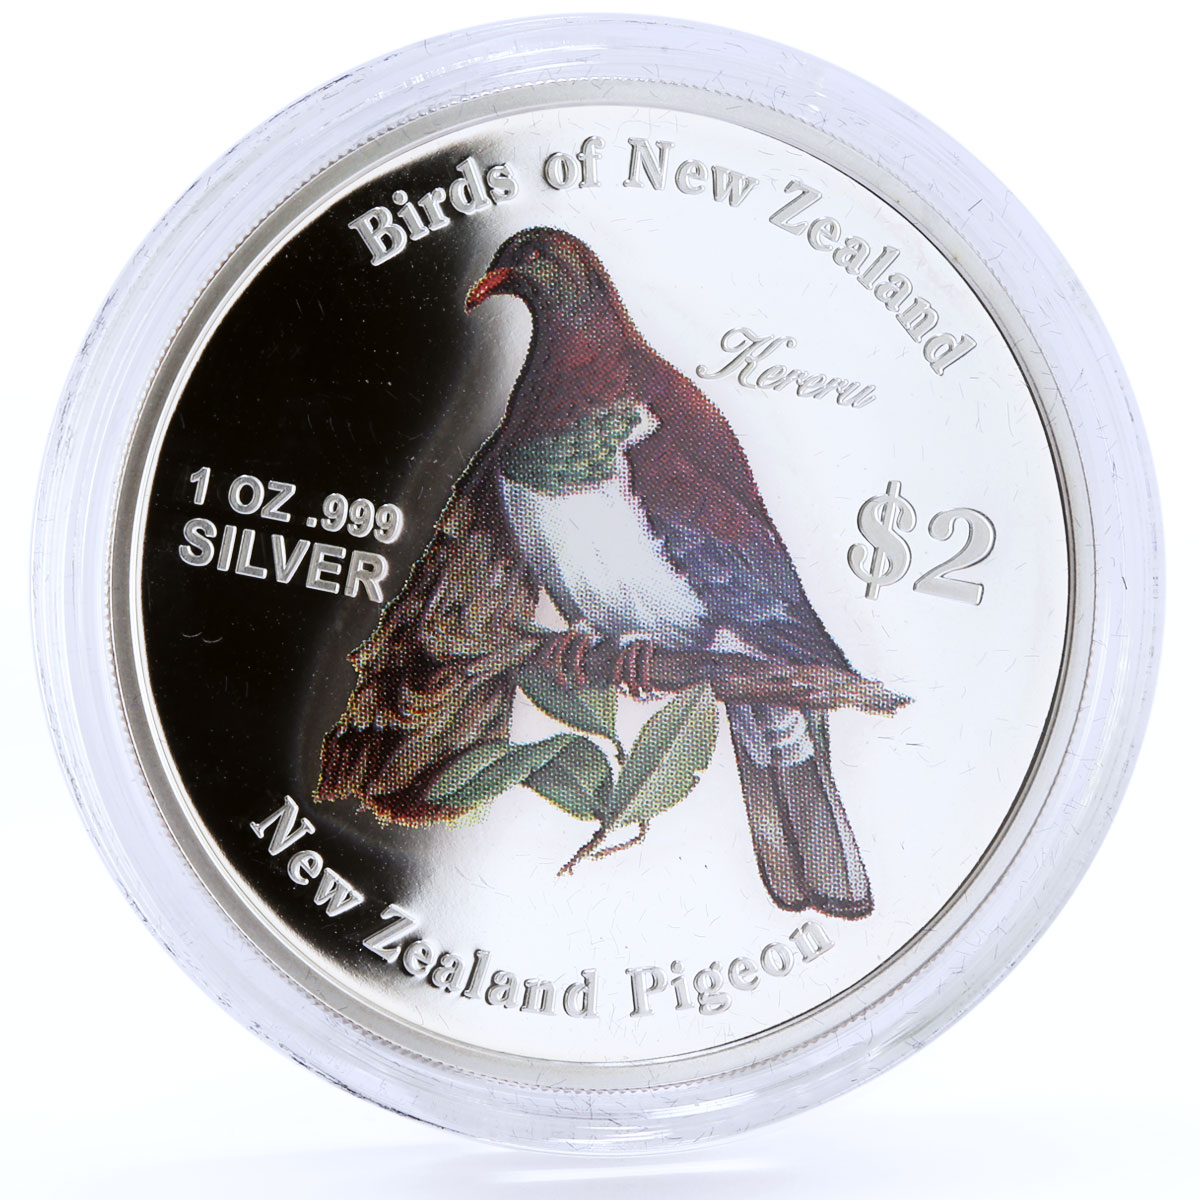 Cook Islands set of 4 coins New Zealand Birds Fauna colored silver coins 2005